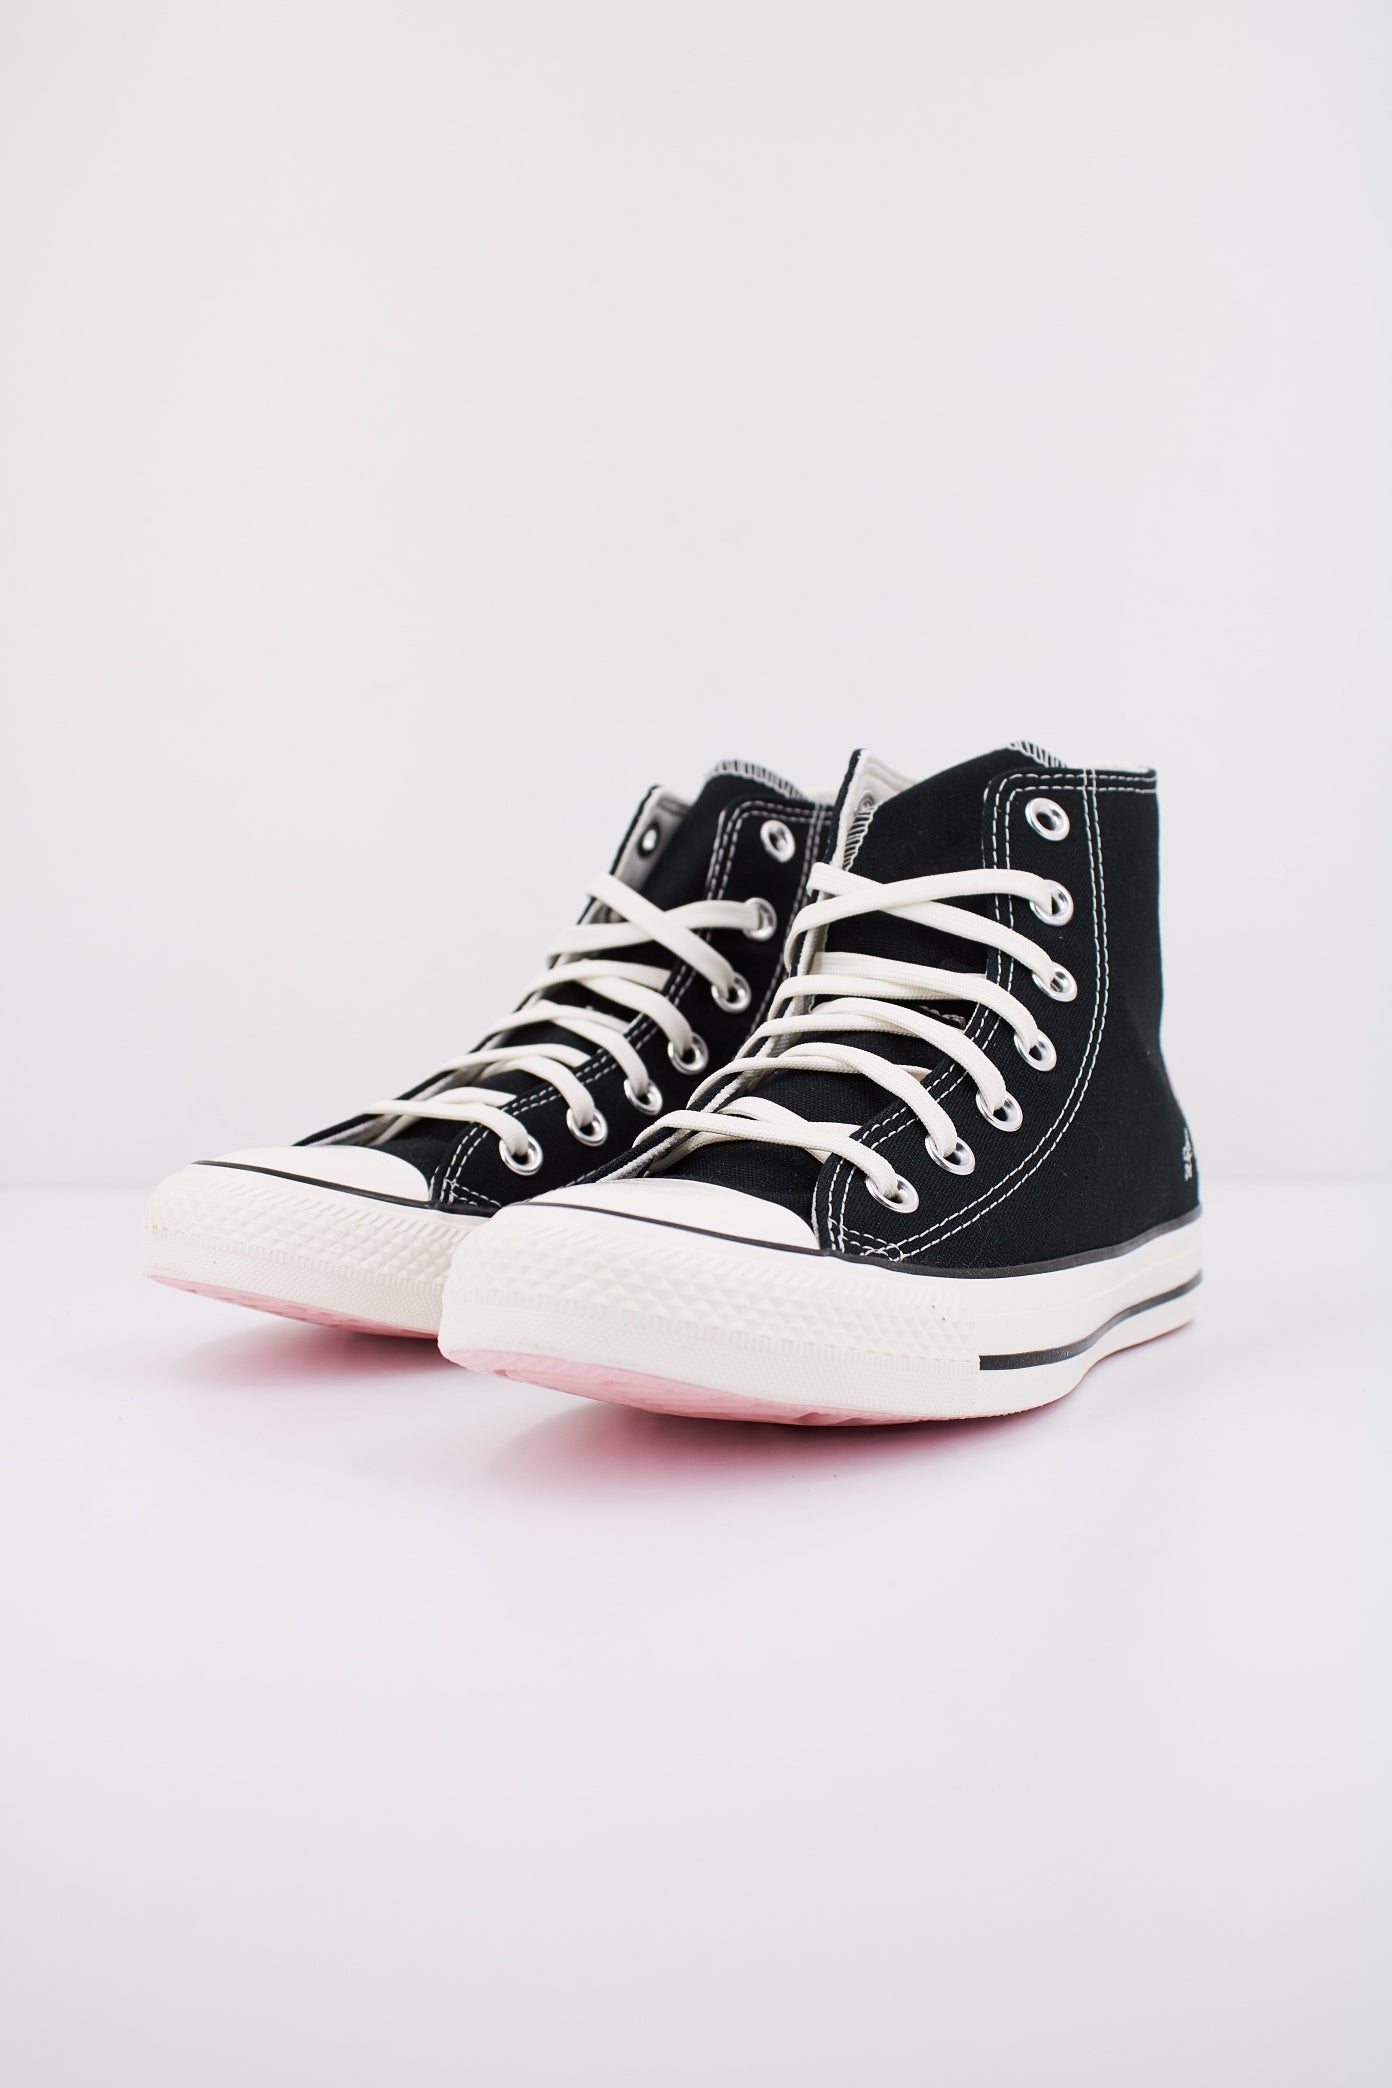 CONVERSE  CHUCK TAYLOR ALL STAR EMBROIDERED LITTLE FLOWERS en color NEGRO  (2)